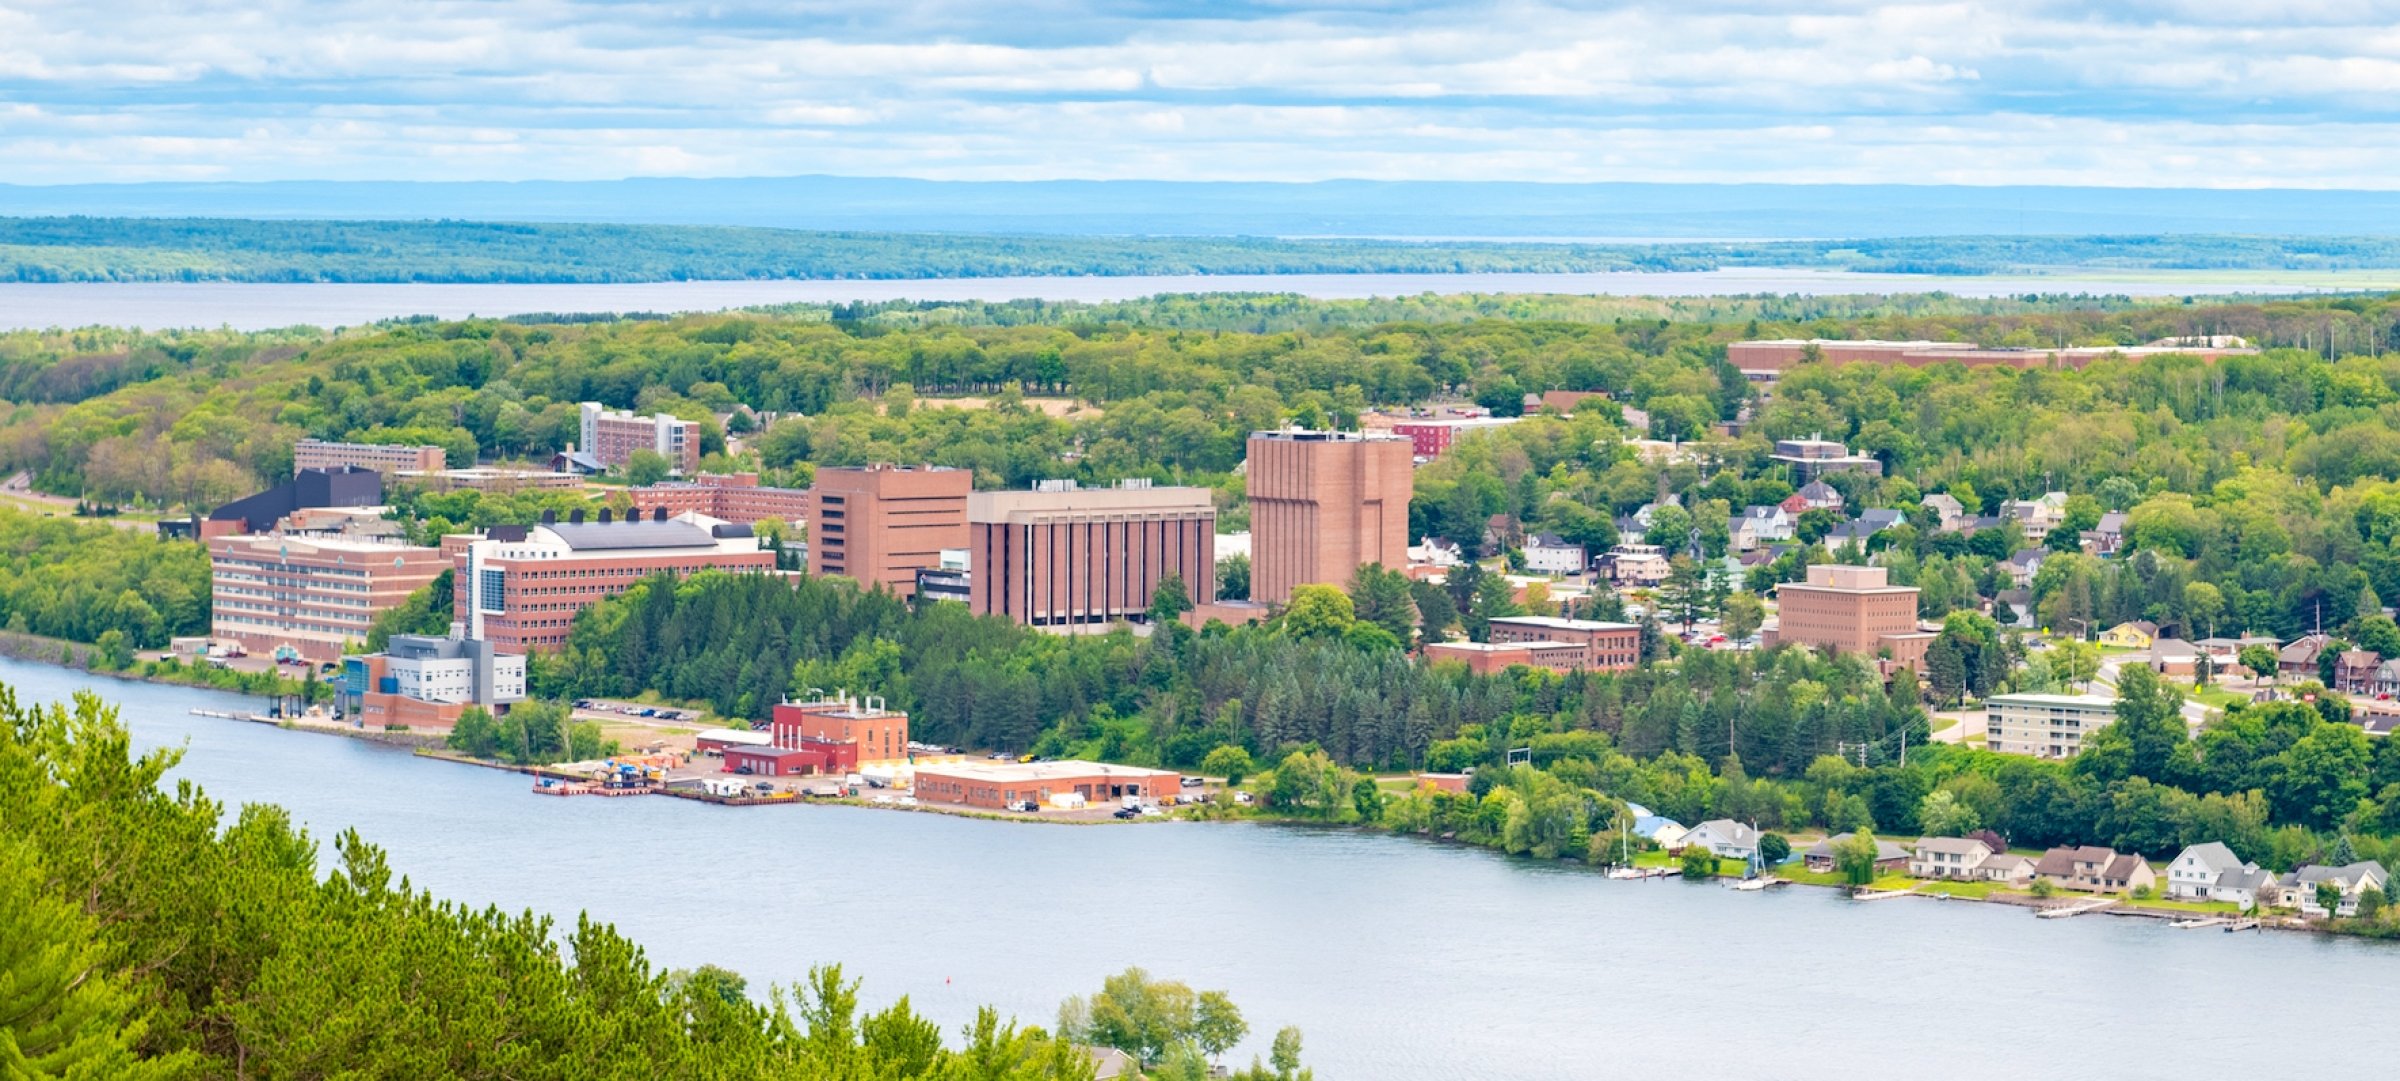 Michigan Tech view from Mont Ripley in summer.